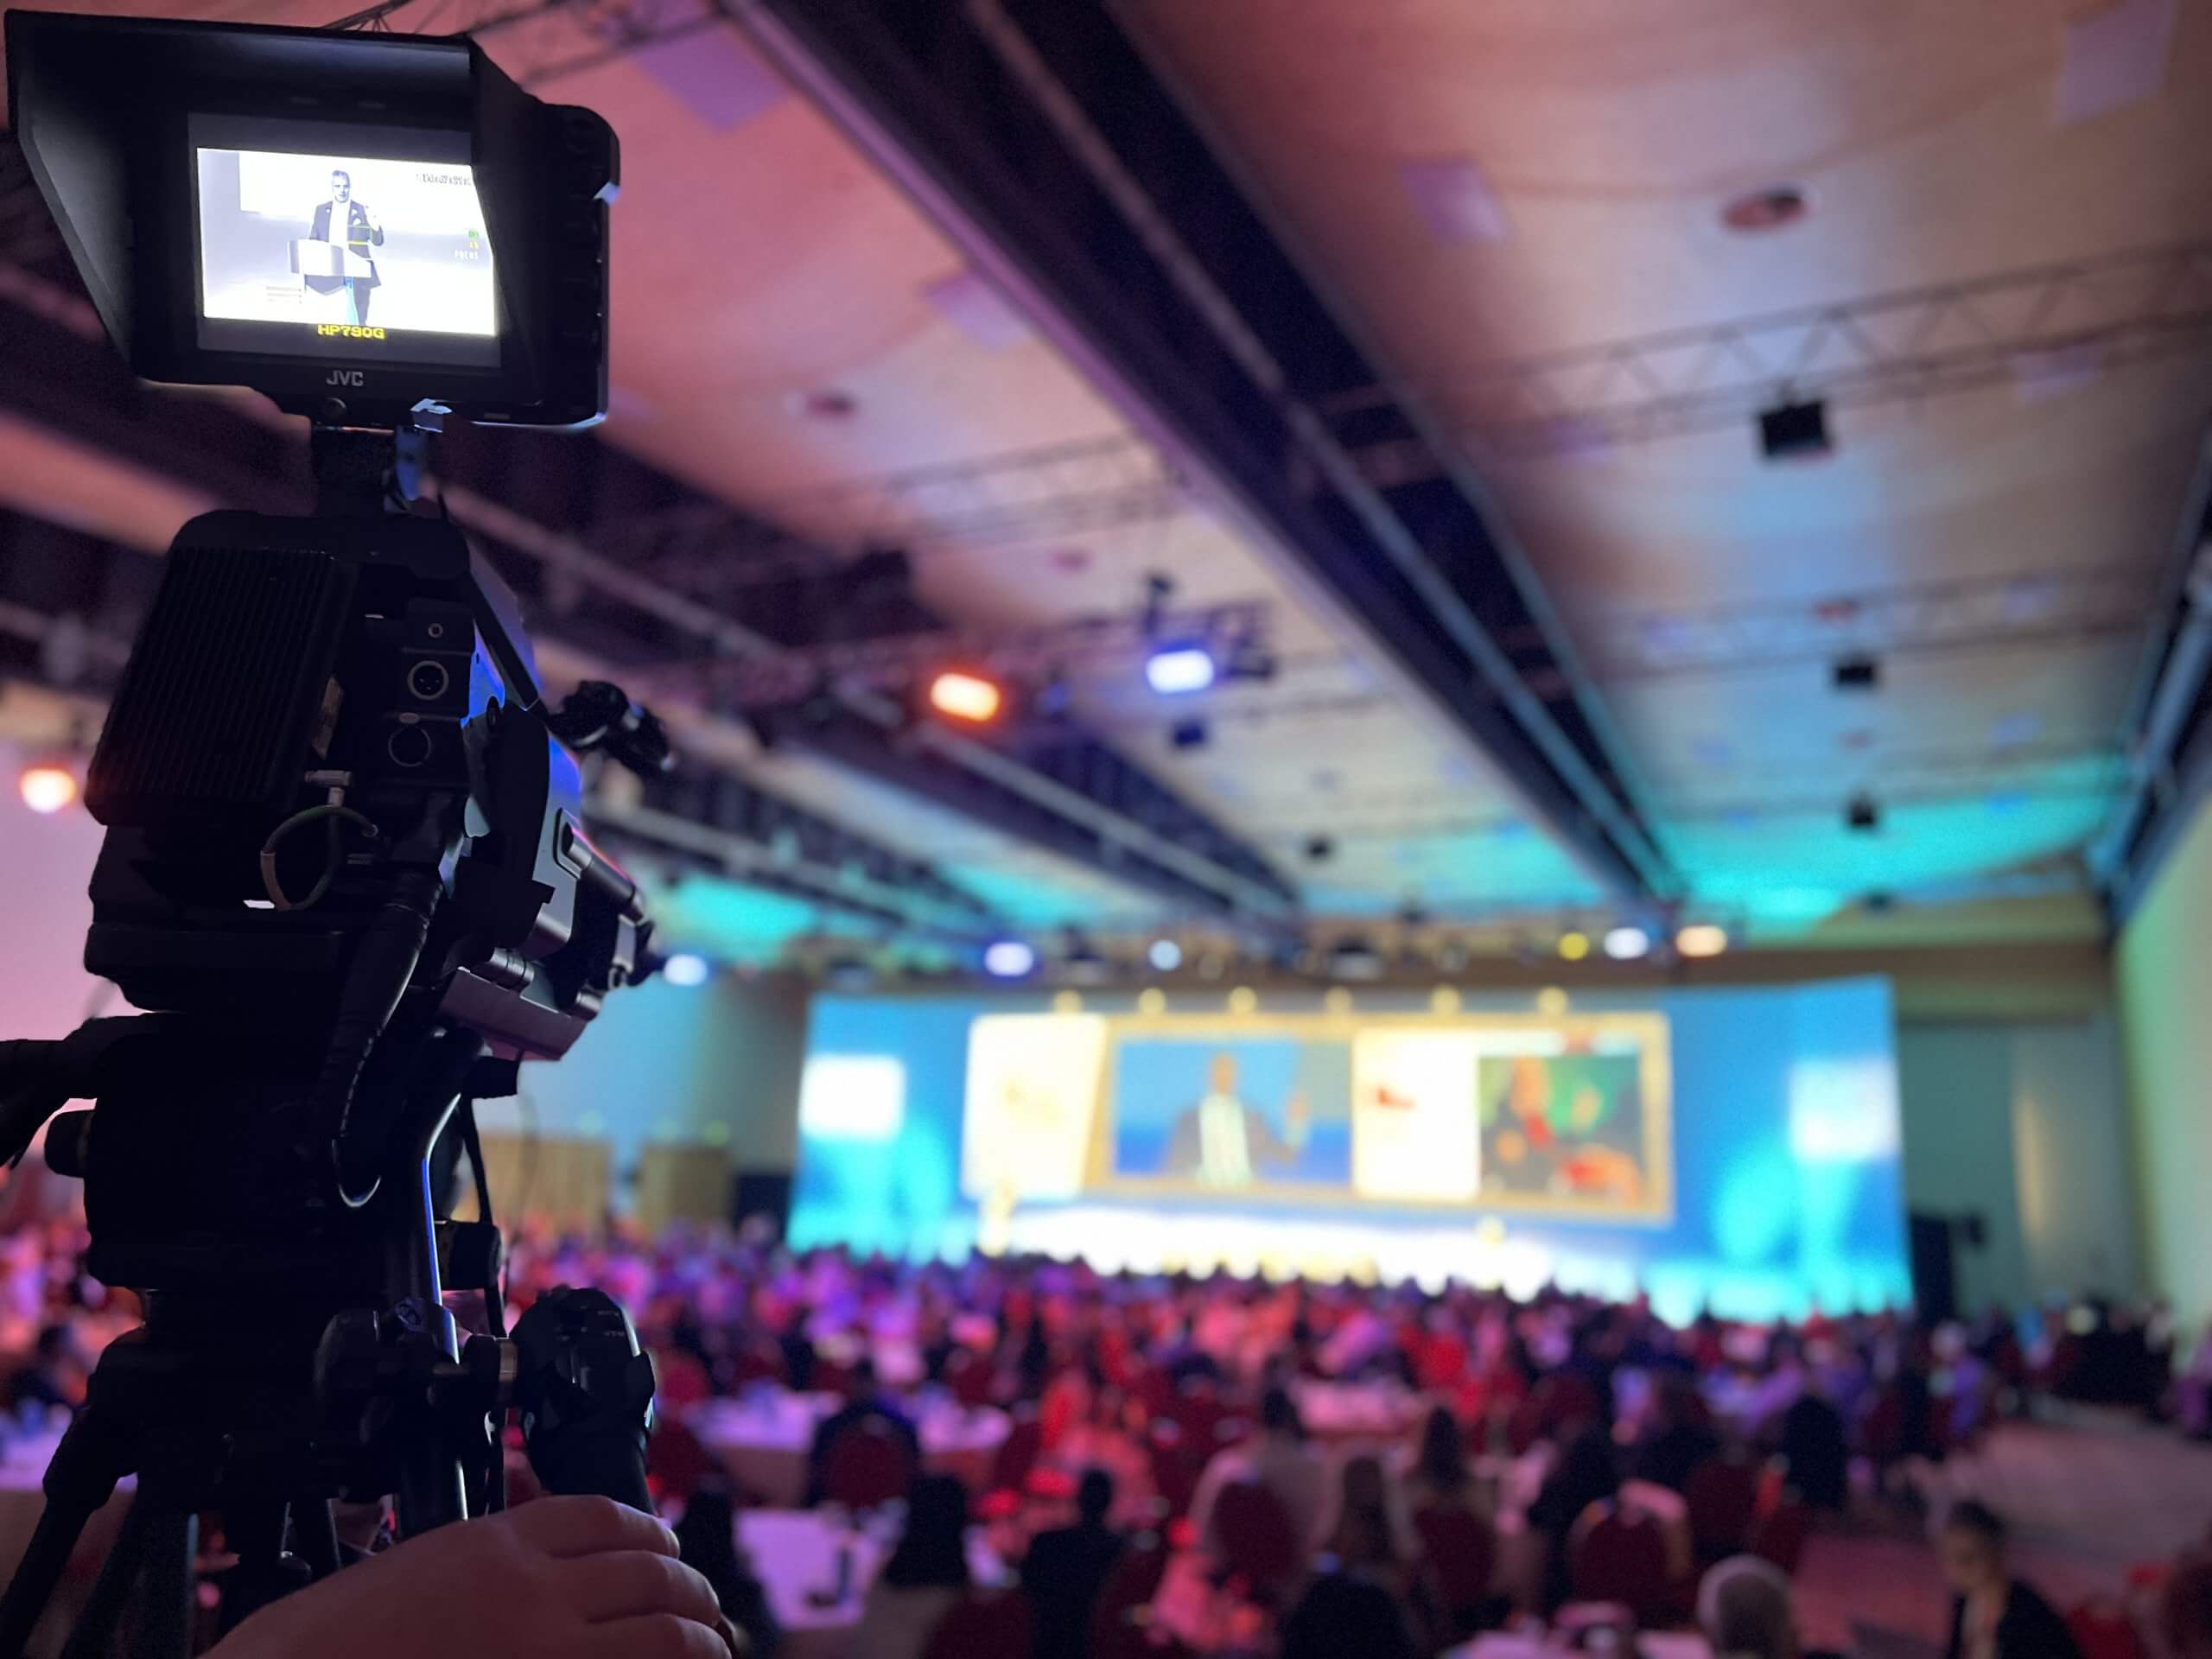 Protec provide AV support and staging for ICMIF conference rome 2022 including camera package